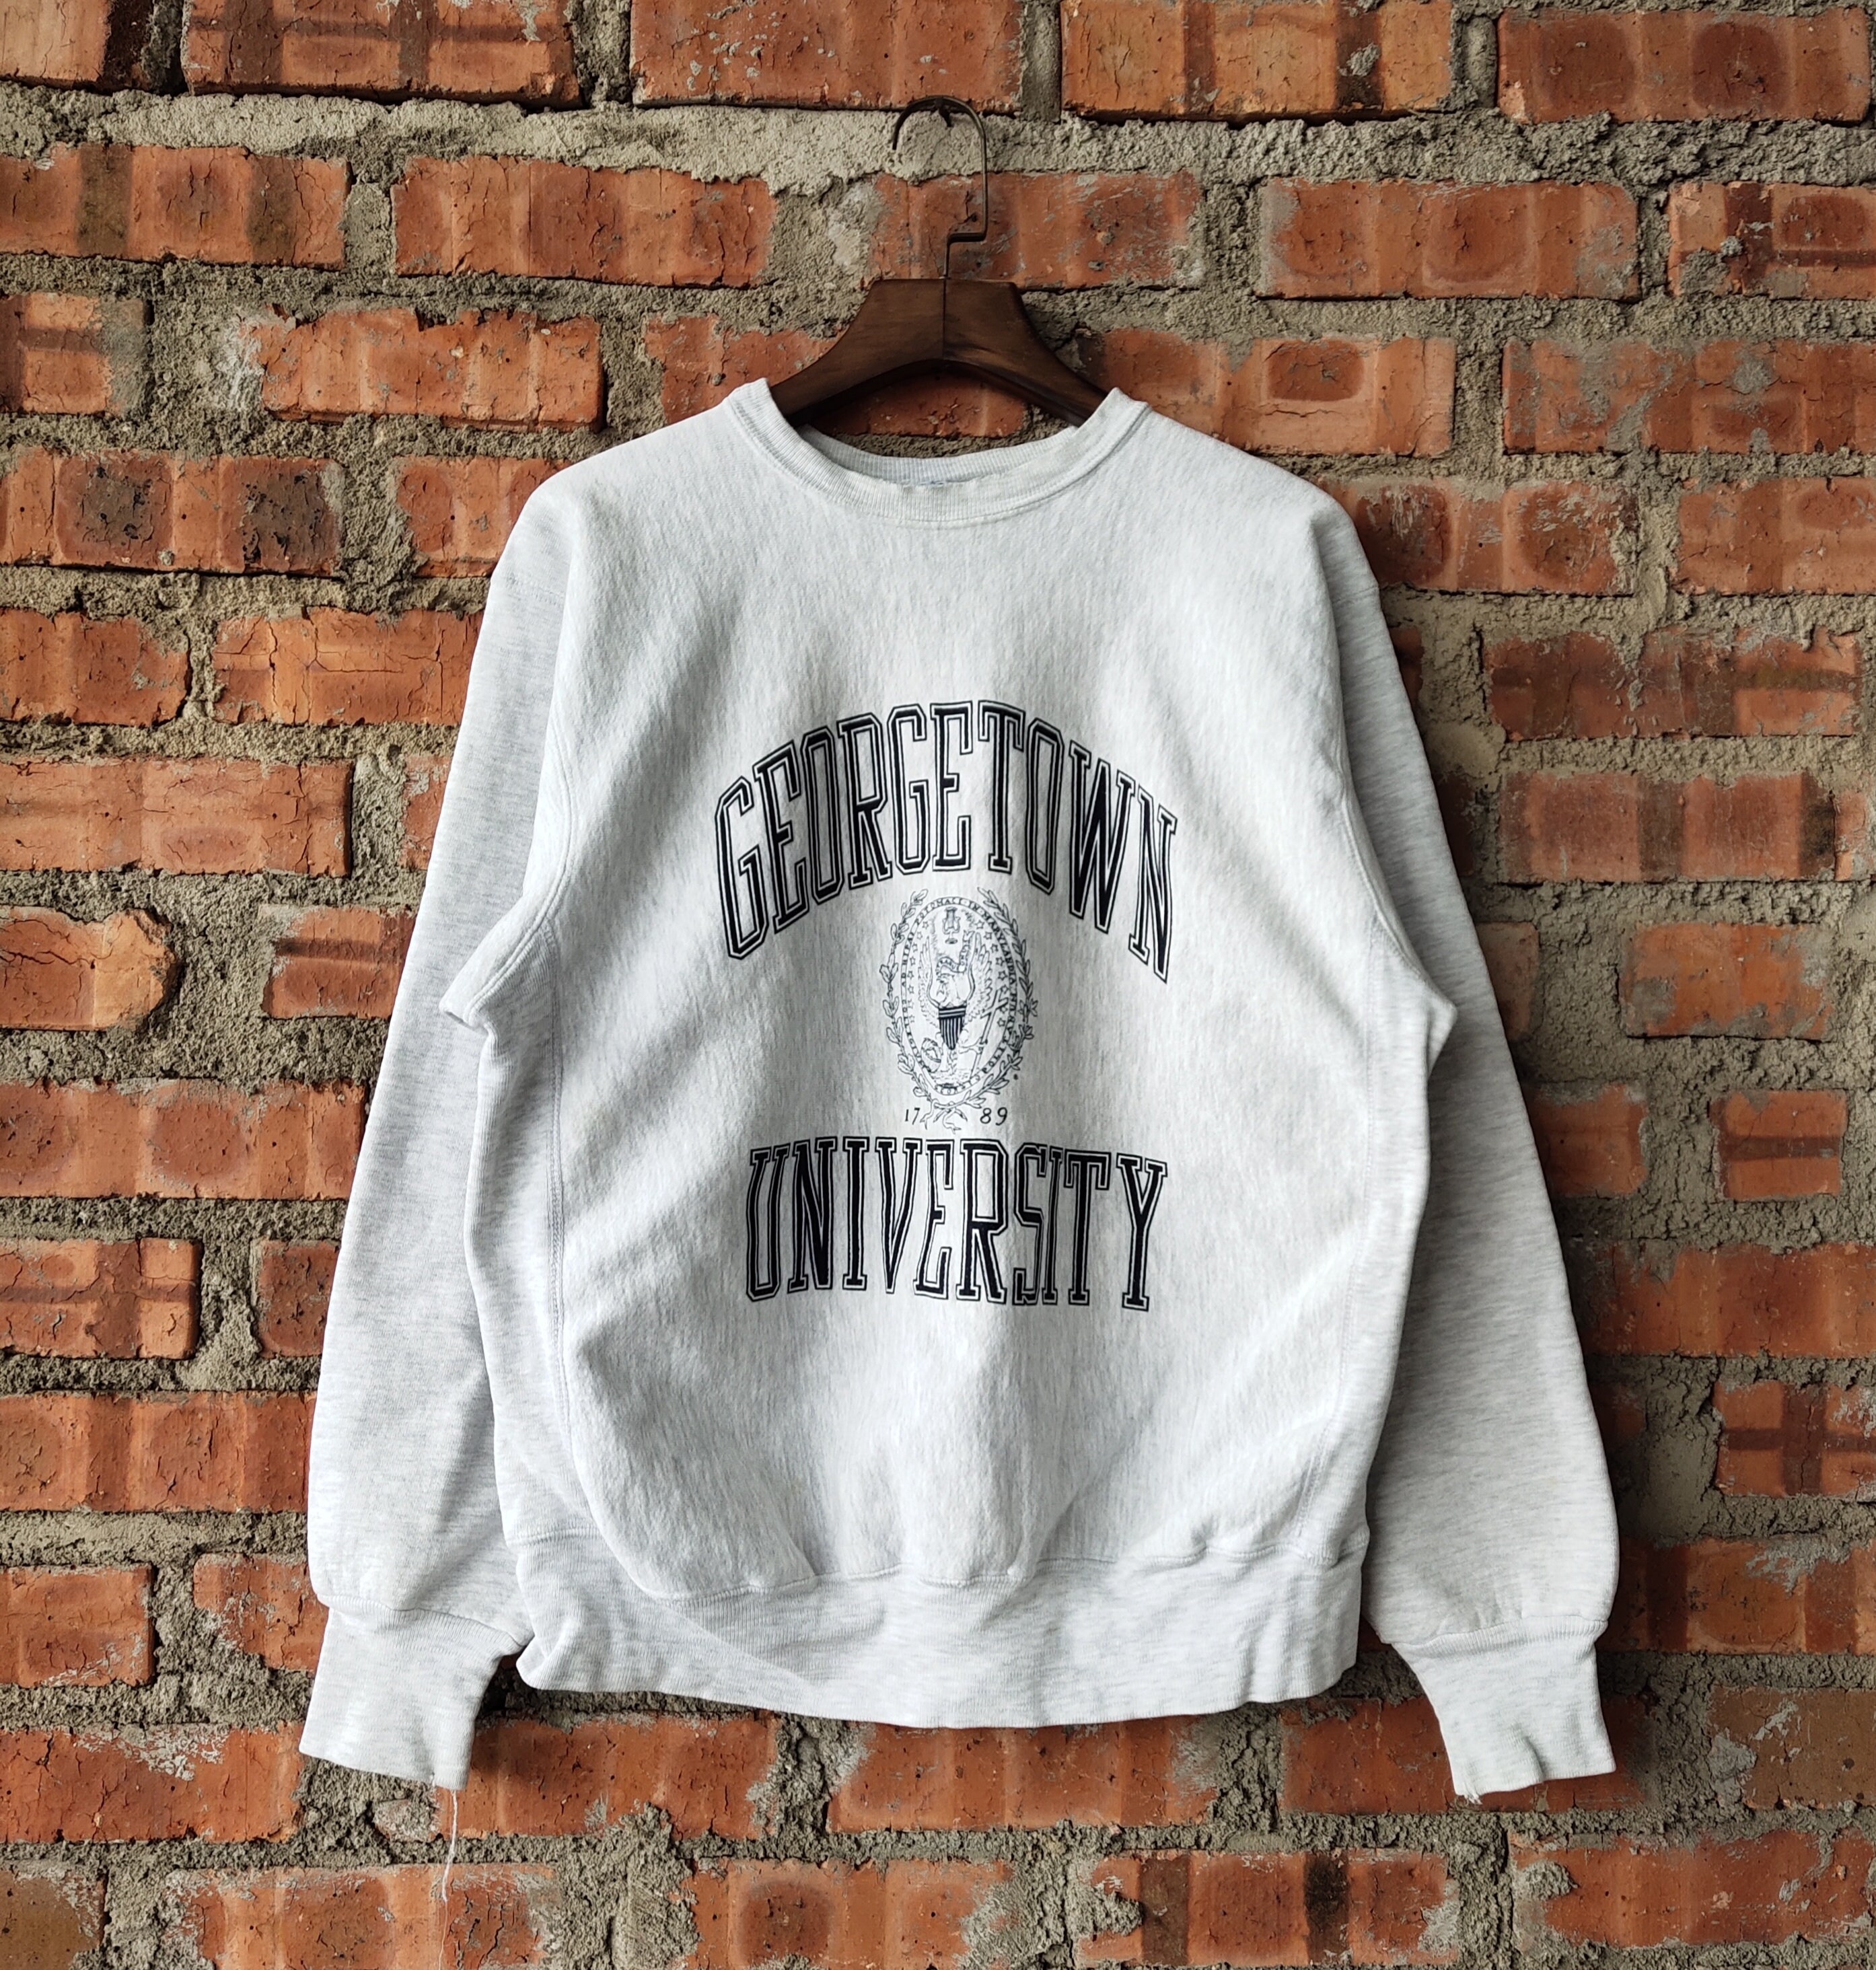 Very Rare! Vintage Style Georgetown Hoyas Starter NBA Tshirt Hoodie  Crewneck Sweatshirt Reprinted Full Color Full Size Gifts for NBA Fans -  Bluefink